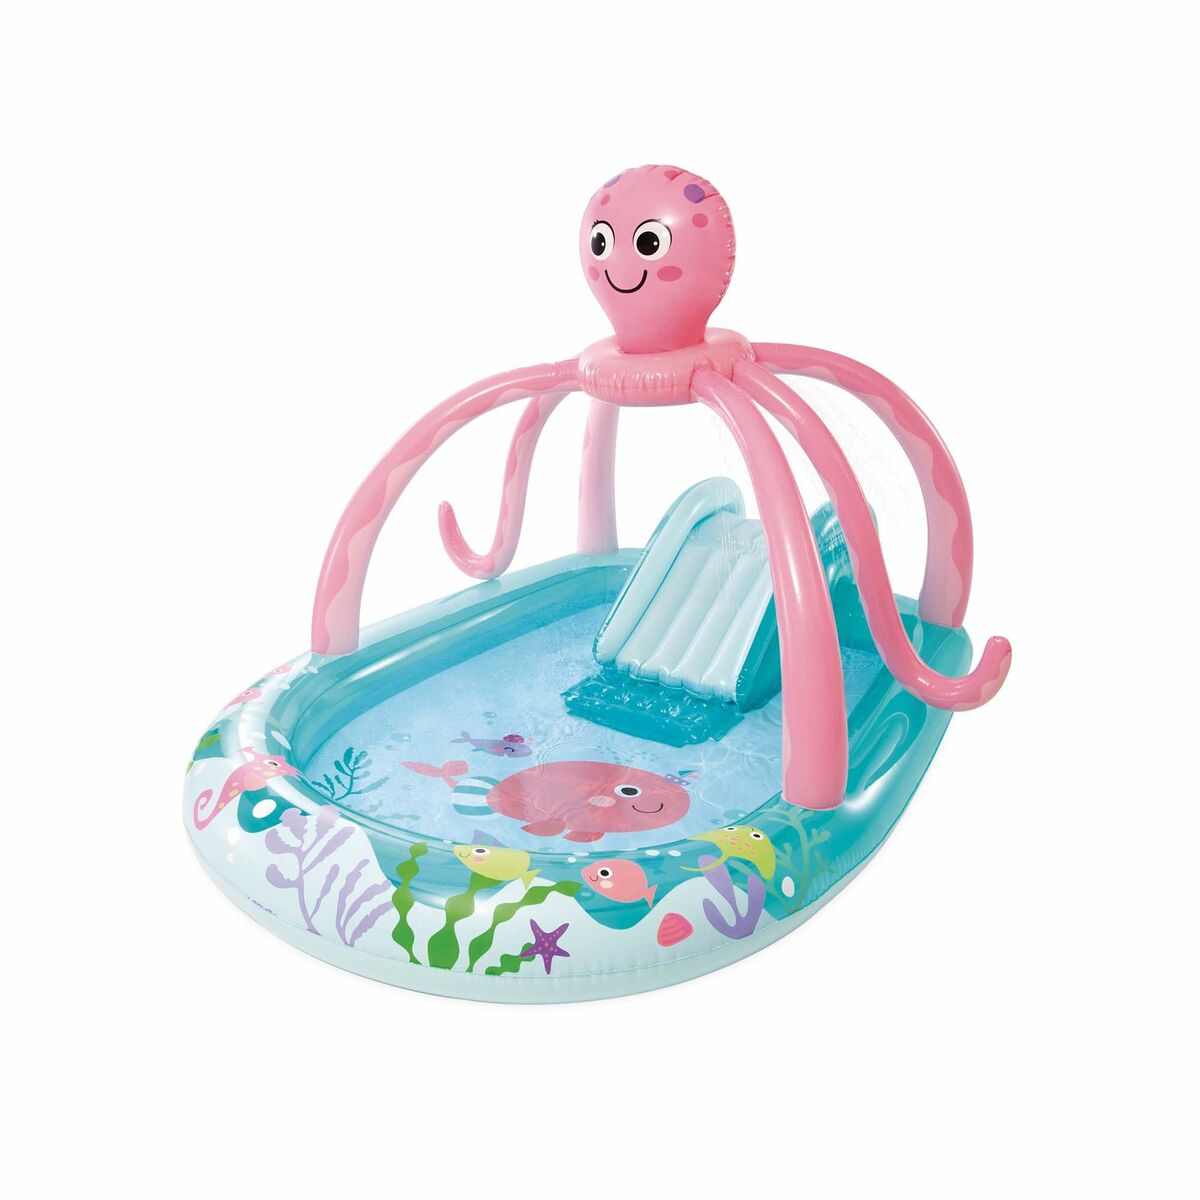 Inflatable Paddling Pool for Children Intex Octopus 229 L 243 x 183 x 150 cm Octopus